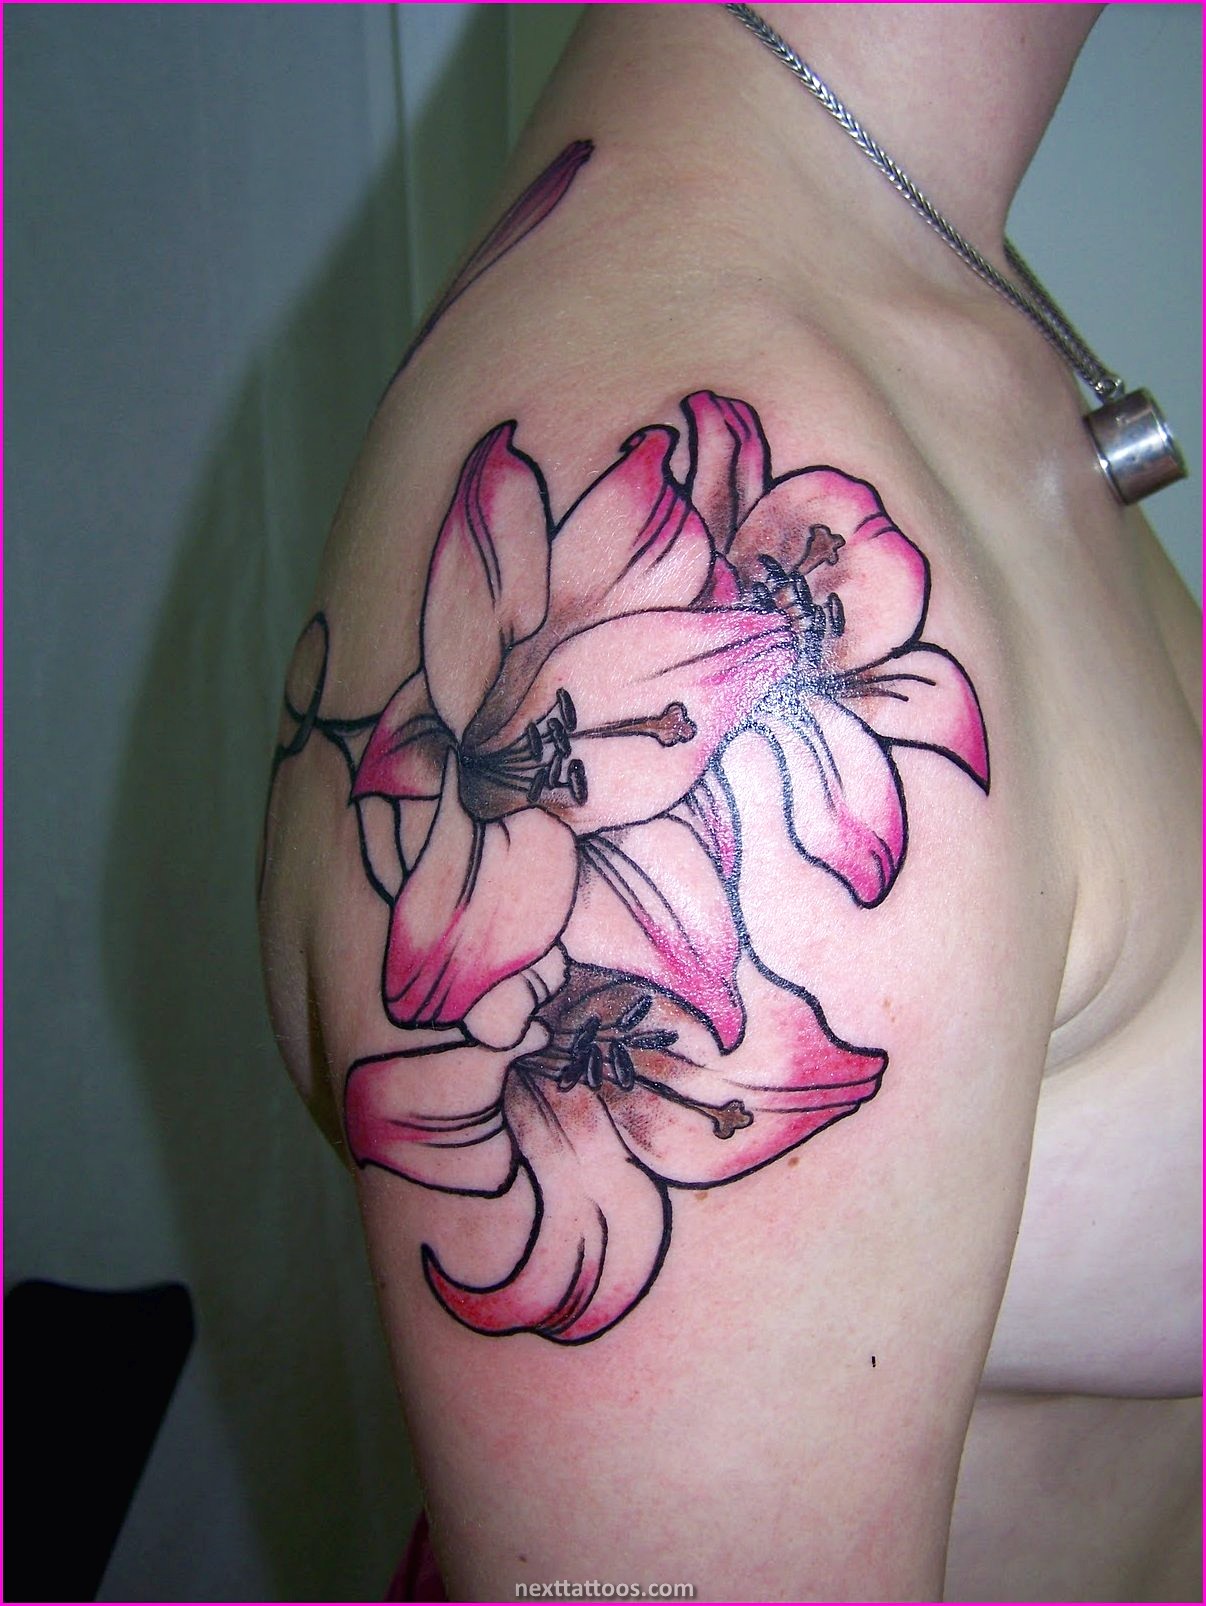 Flower Tattoo Ideas - Forearm and Hand Designs